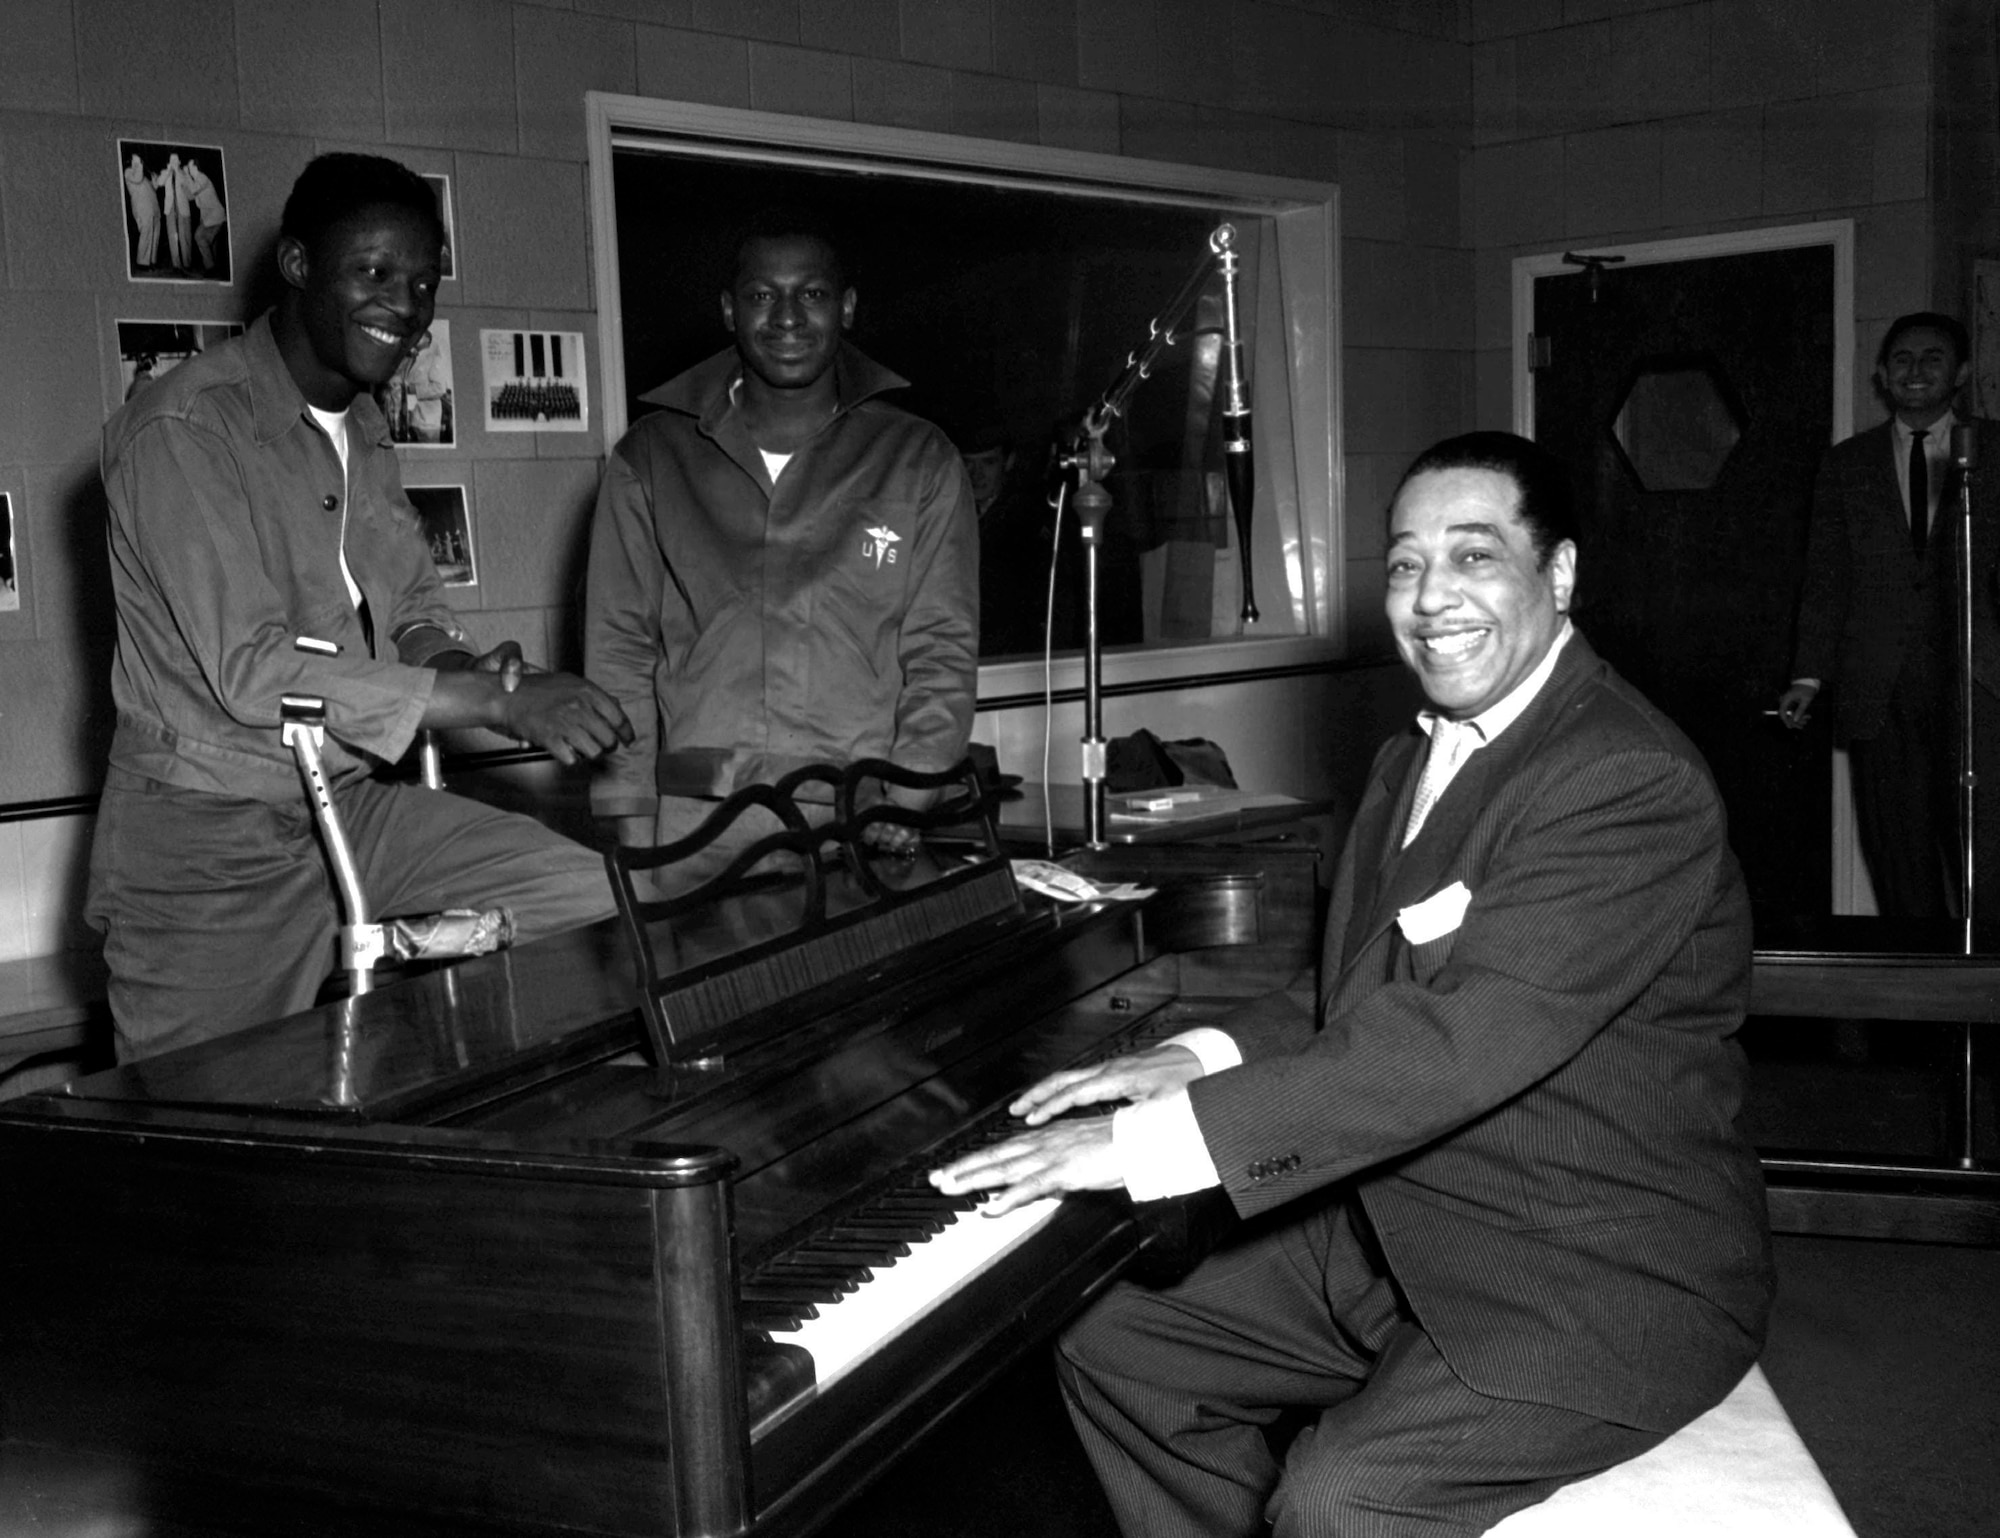 Jazz pianist Duke Ellington poses Nov. 3, 1954, at the KFG Radio Studio for Fitzsimons Army Medical Center in Aurora, Colorado. Ellington played three shows at Travis Air Force Base, California, in the 1950s and 1960s, one of which was released as a live album in the 1980s.(U.S. Army photo)